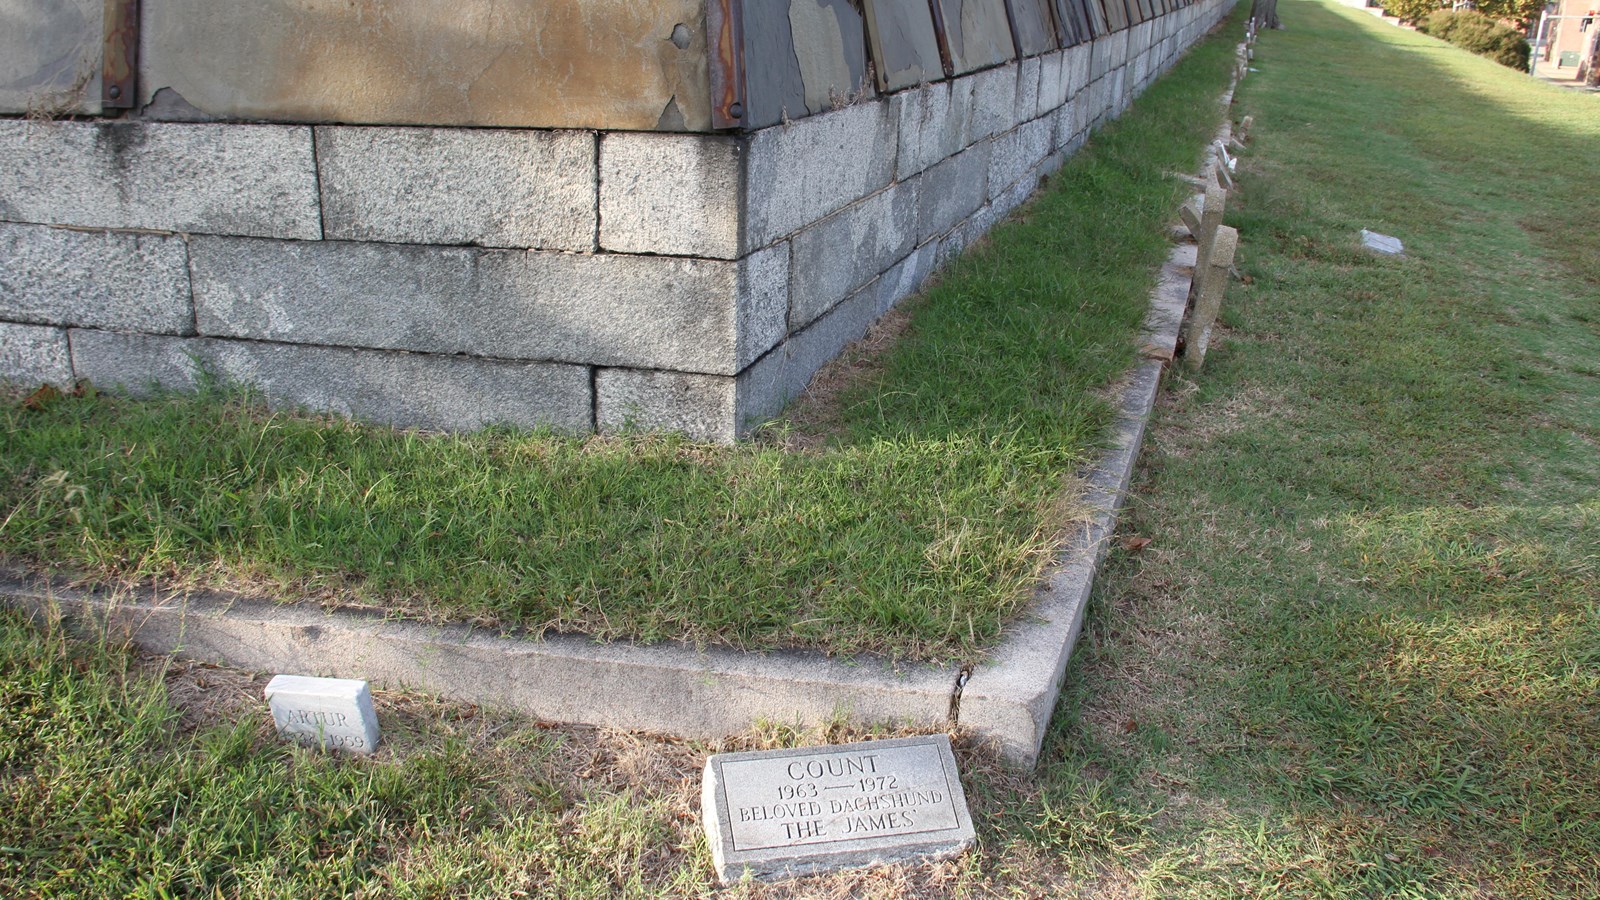 Grave markers at base of breast-height wall coming to a point at the center and receding back  